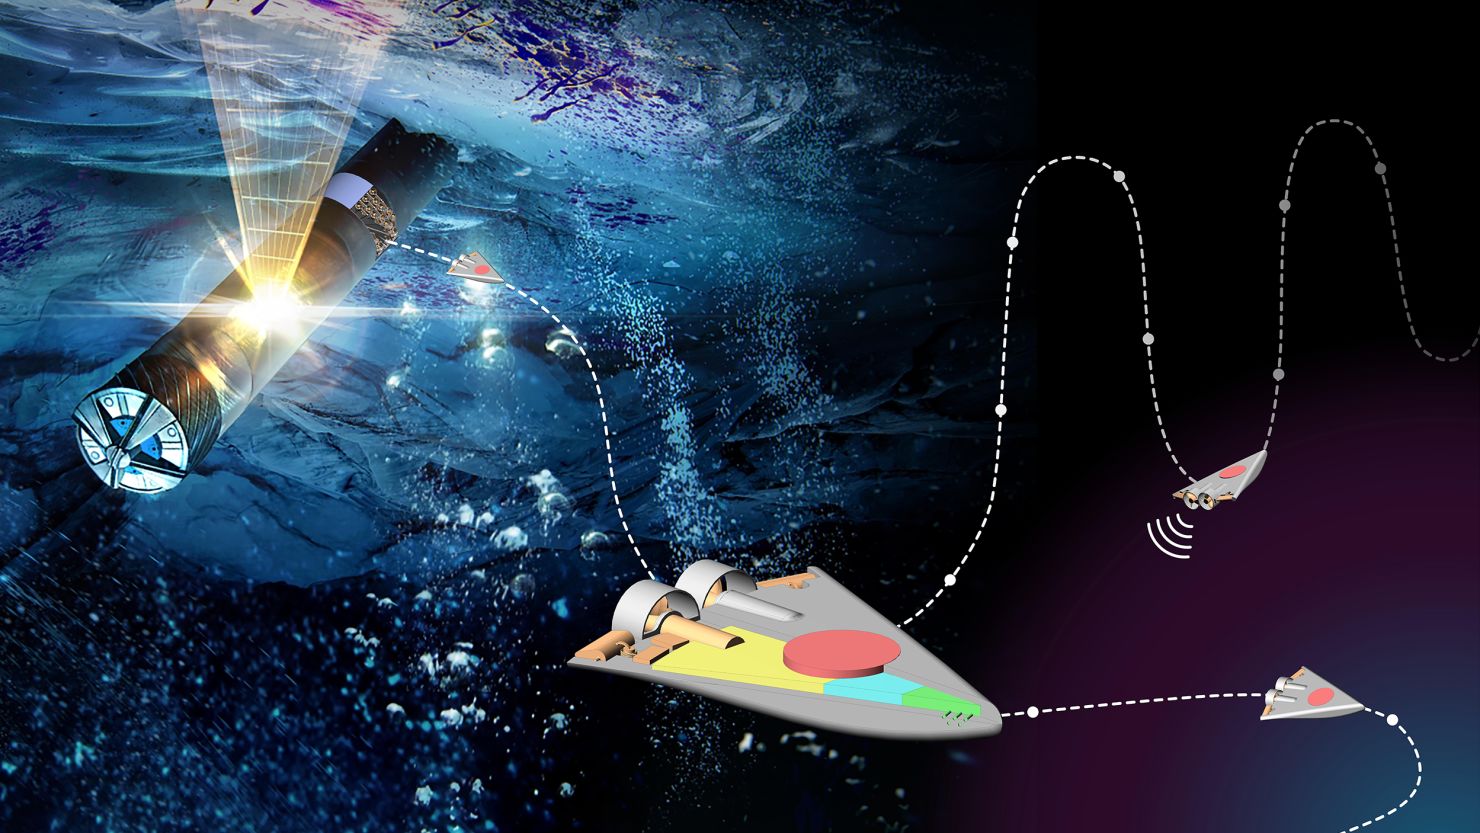 With the SWIM concept, a probe would release dozens of swimming bots beneath the ice.